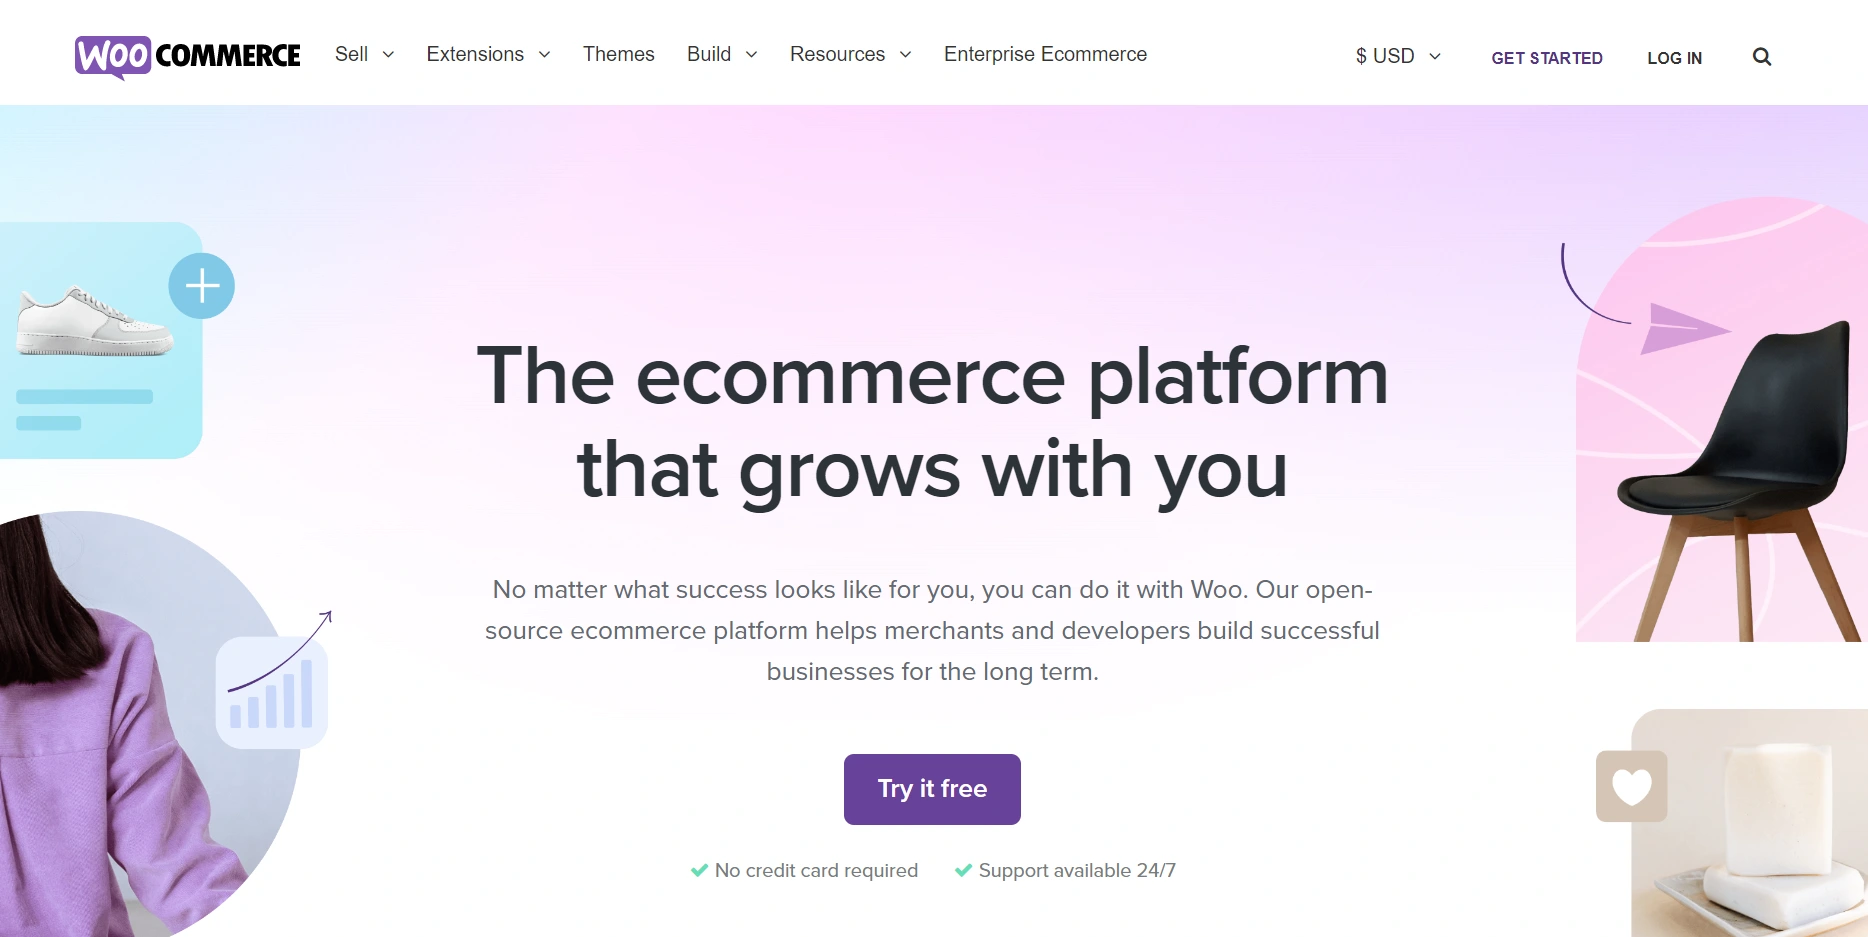 Choose a Theme for Your Woocommerce Store